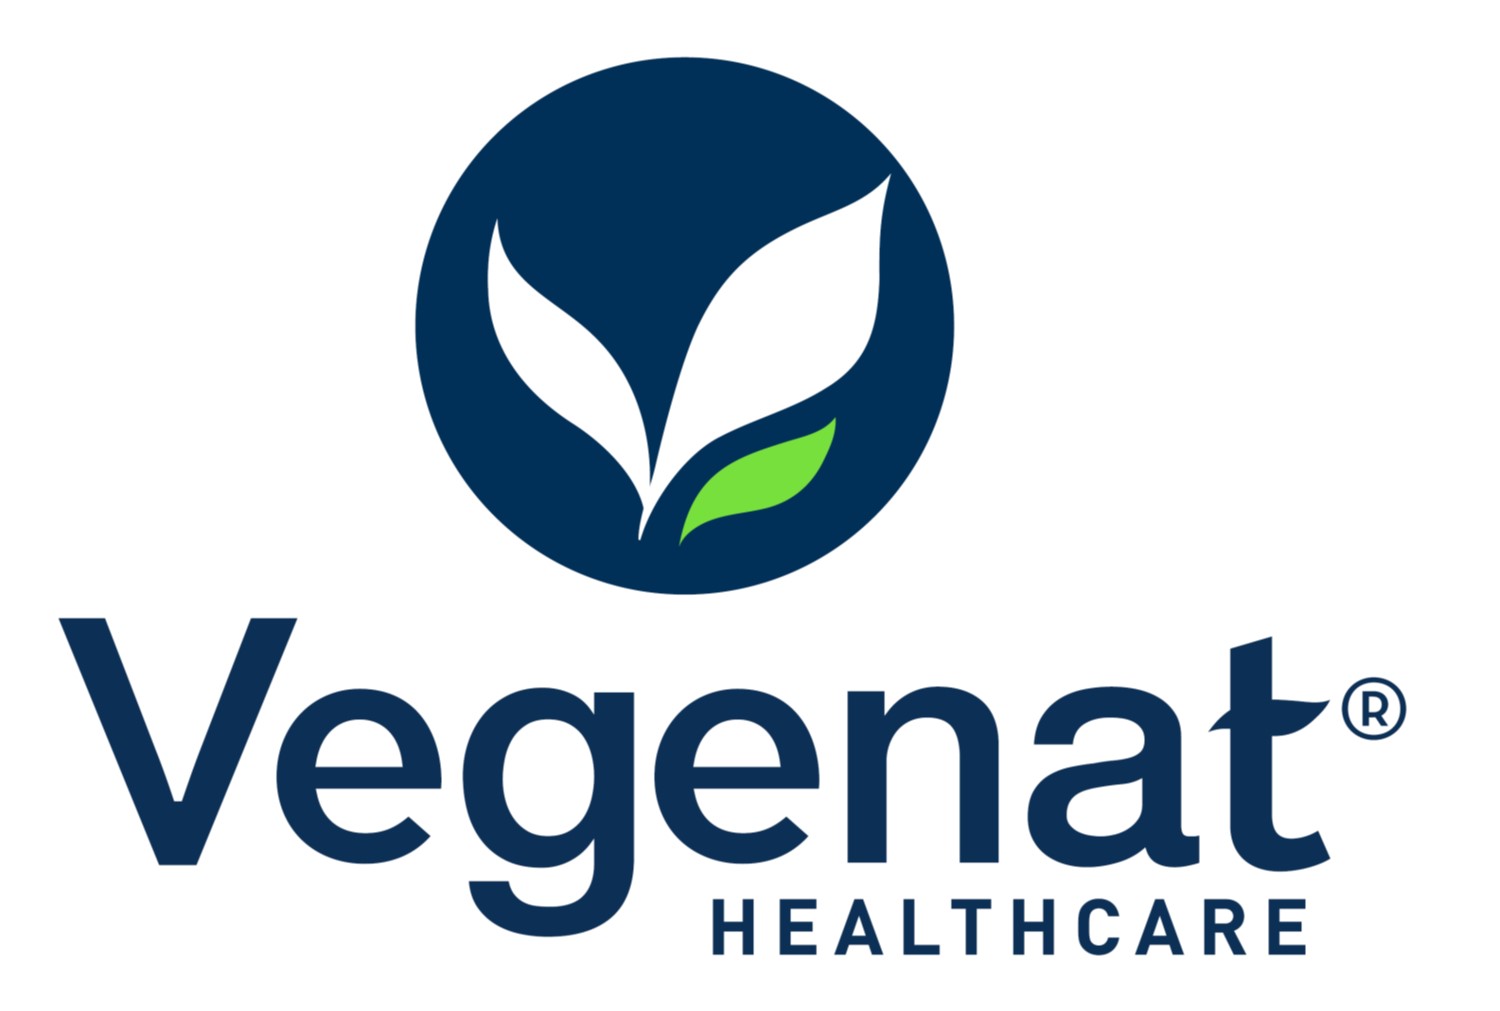 Email: vegenatHC@vegenatHC.es Tel: +34924 47 33 08 Web: www.vegenathealthcare.es Laboratory dedicated to clinical nutrition and texture modified food. VEGENAT HEALTHCARE, with more than 30 years of experience in food and nutrition, specialises in dietetic food and clinical nutrition.